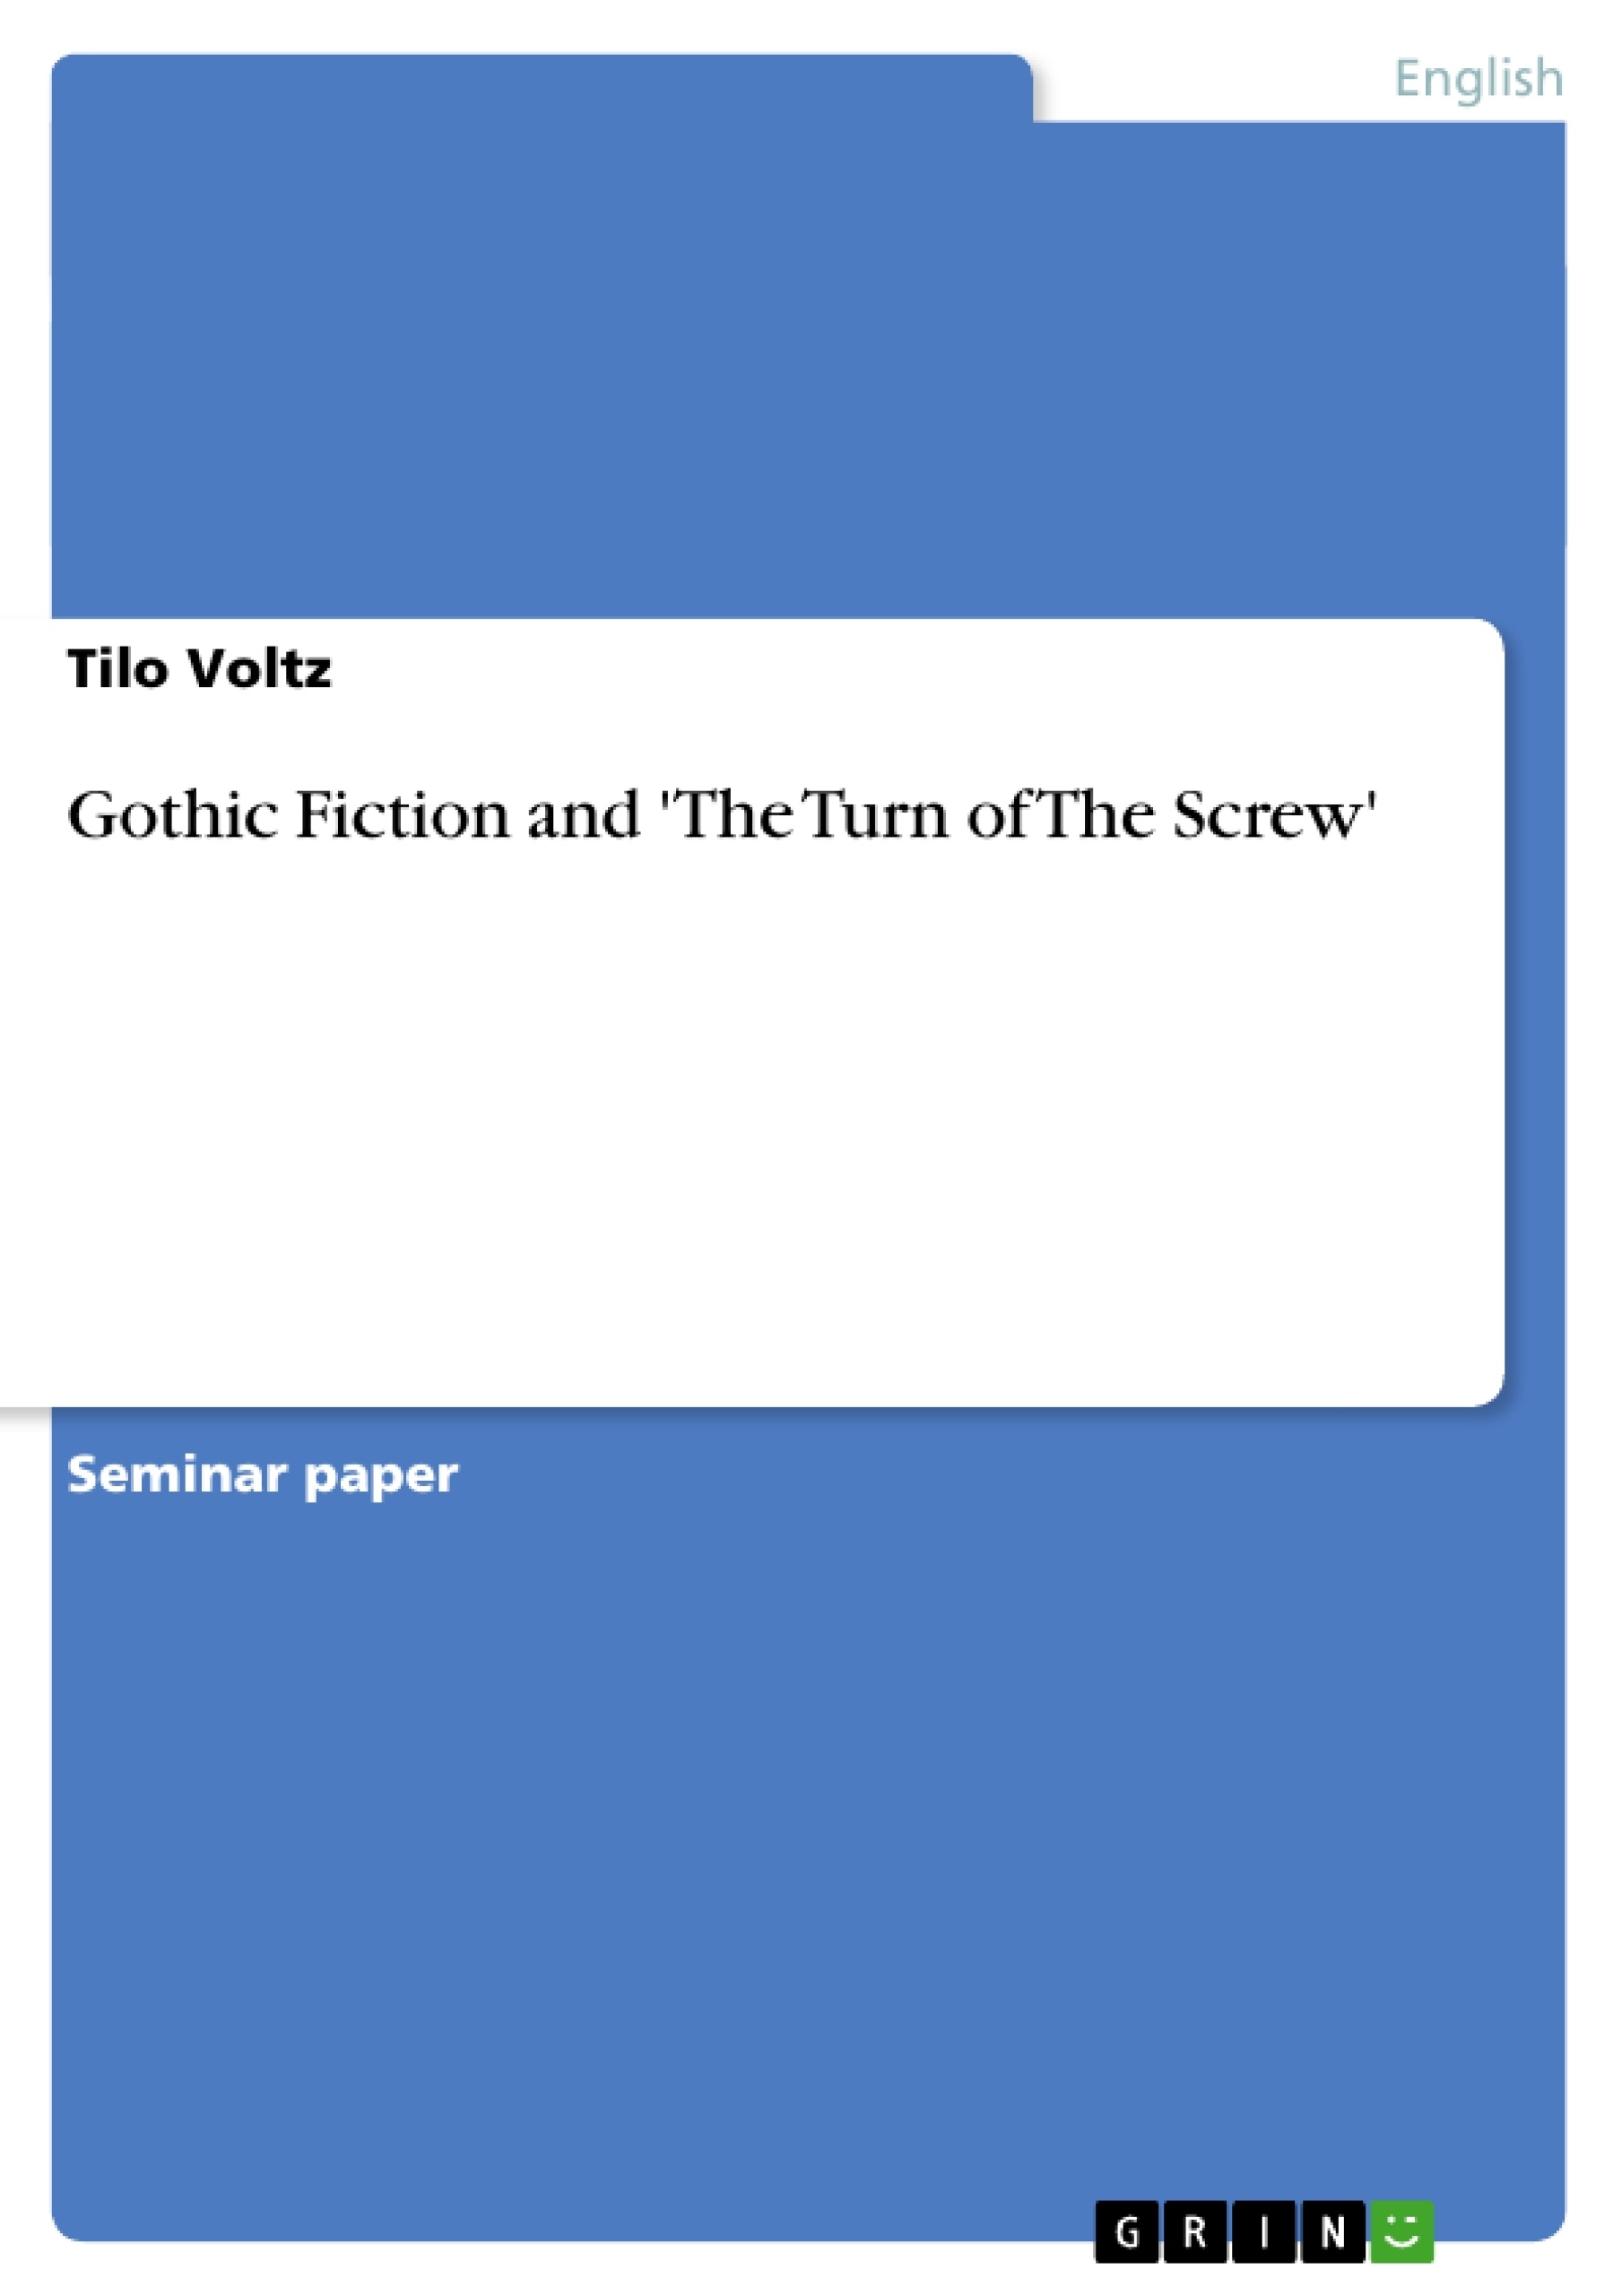 Título: Gothic Fiction and 'The Turn of The Screw'